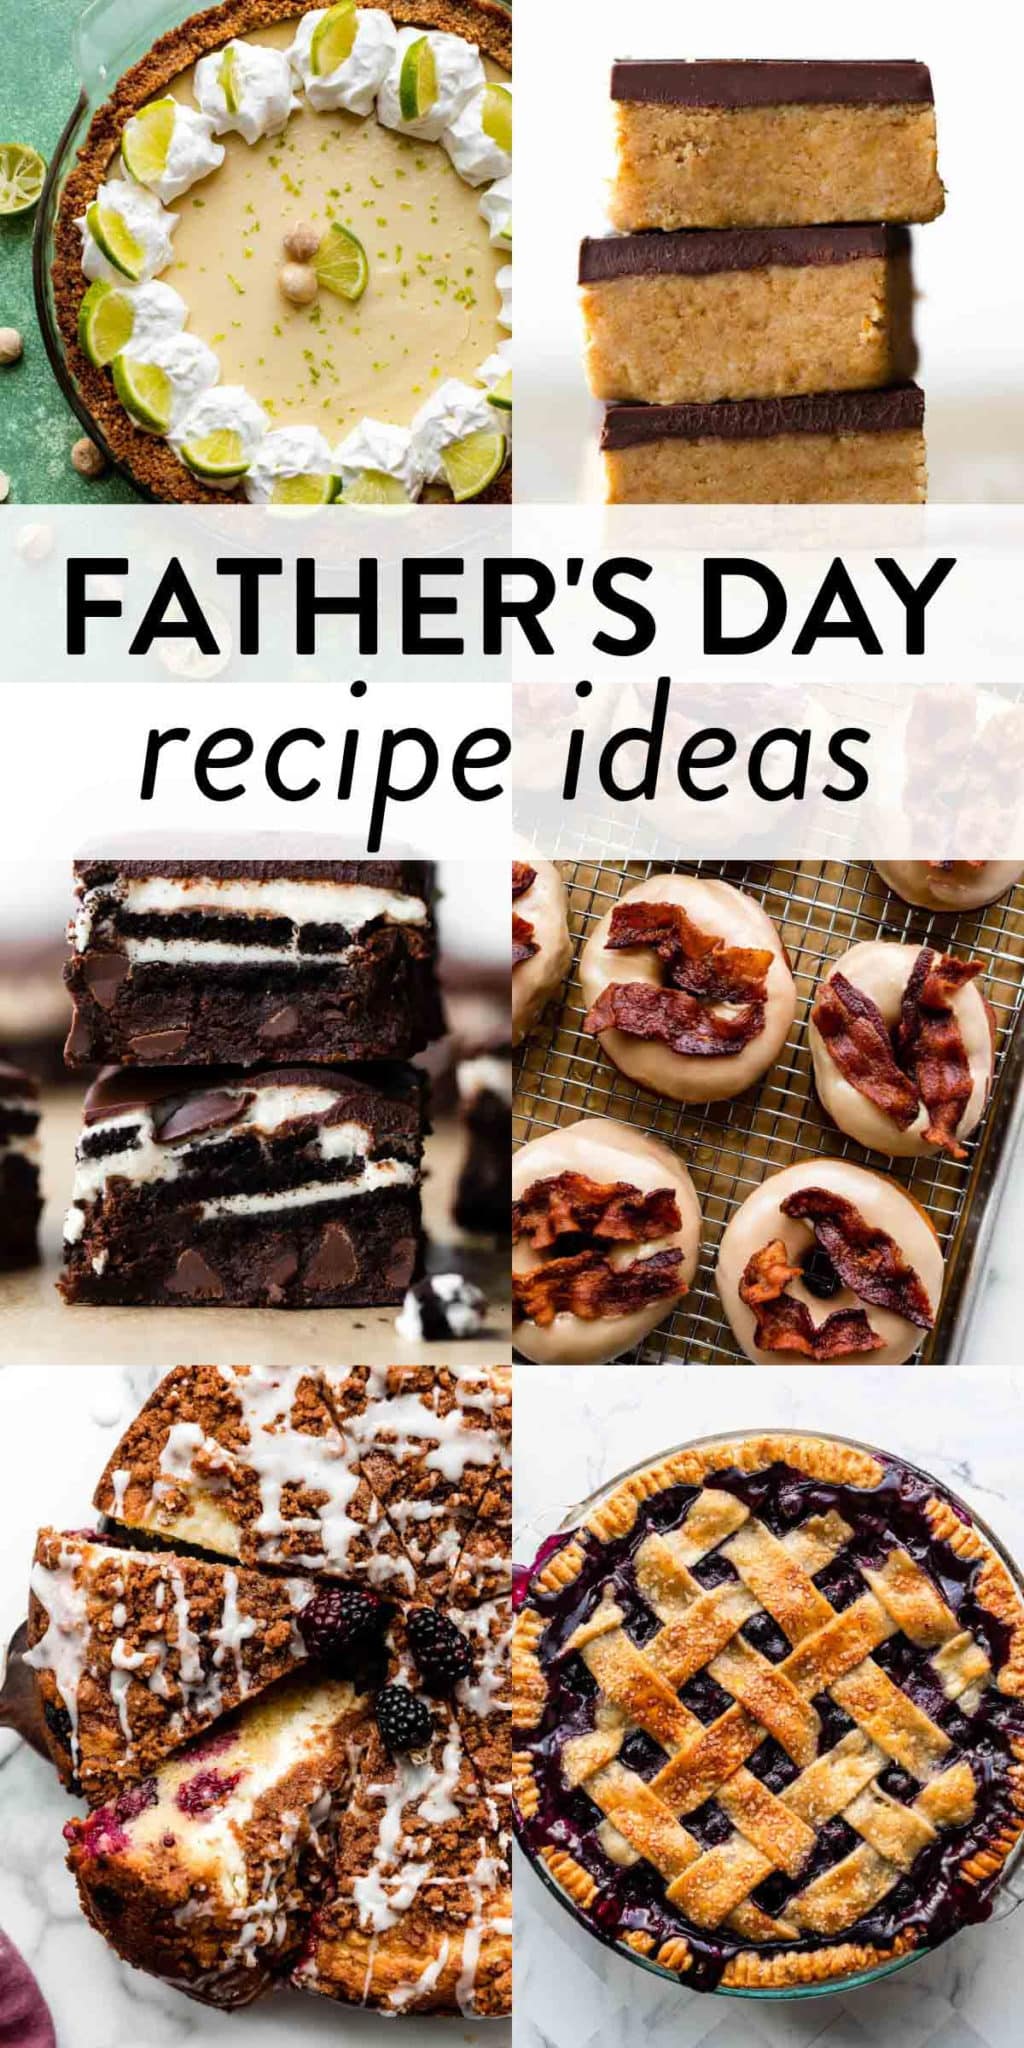 collage showing dessert and breakfast recipes including blueberry pie, peanut butter bars, and maple bacon doughnuts.